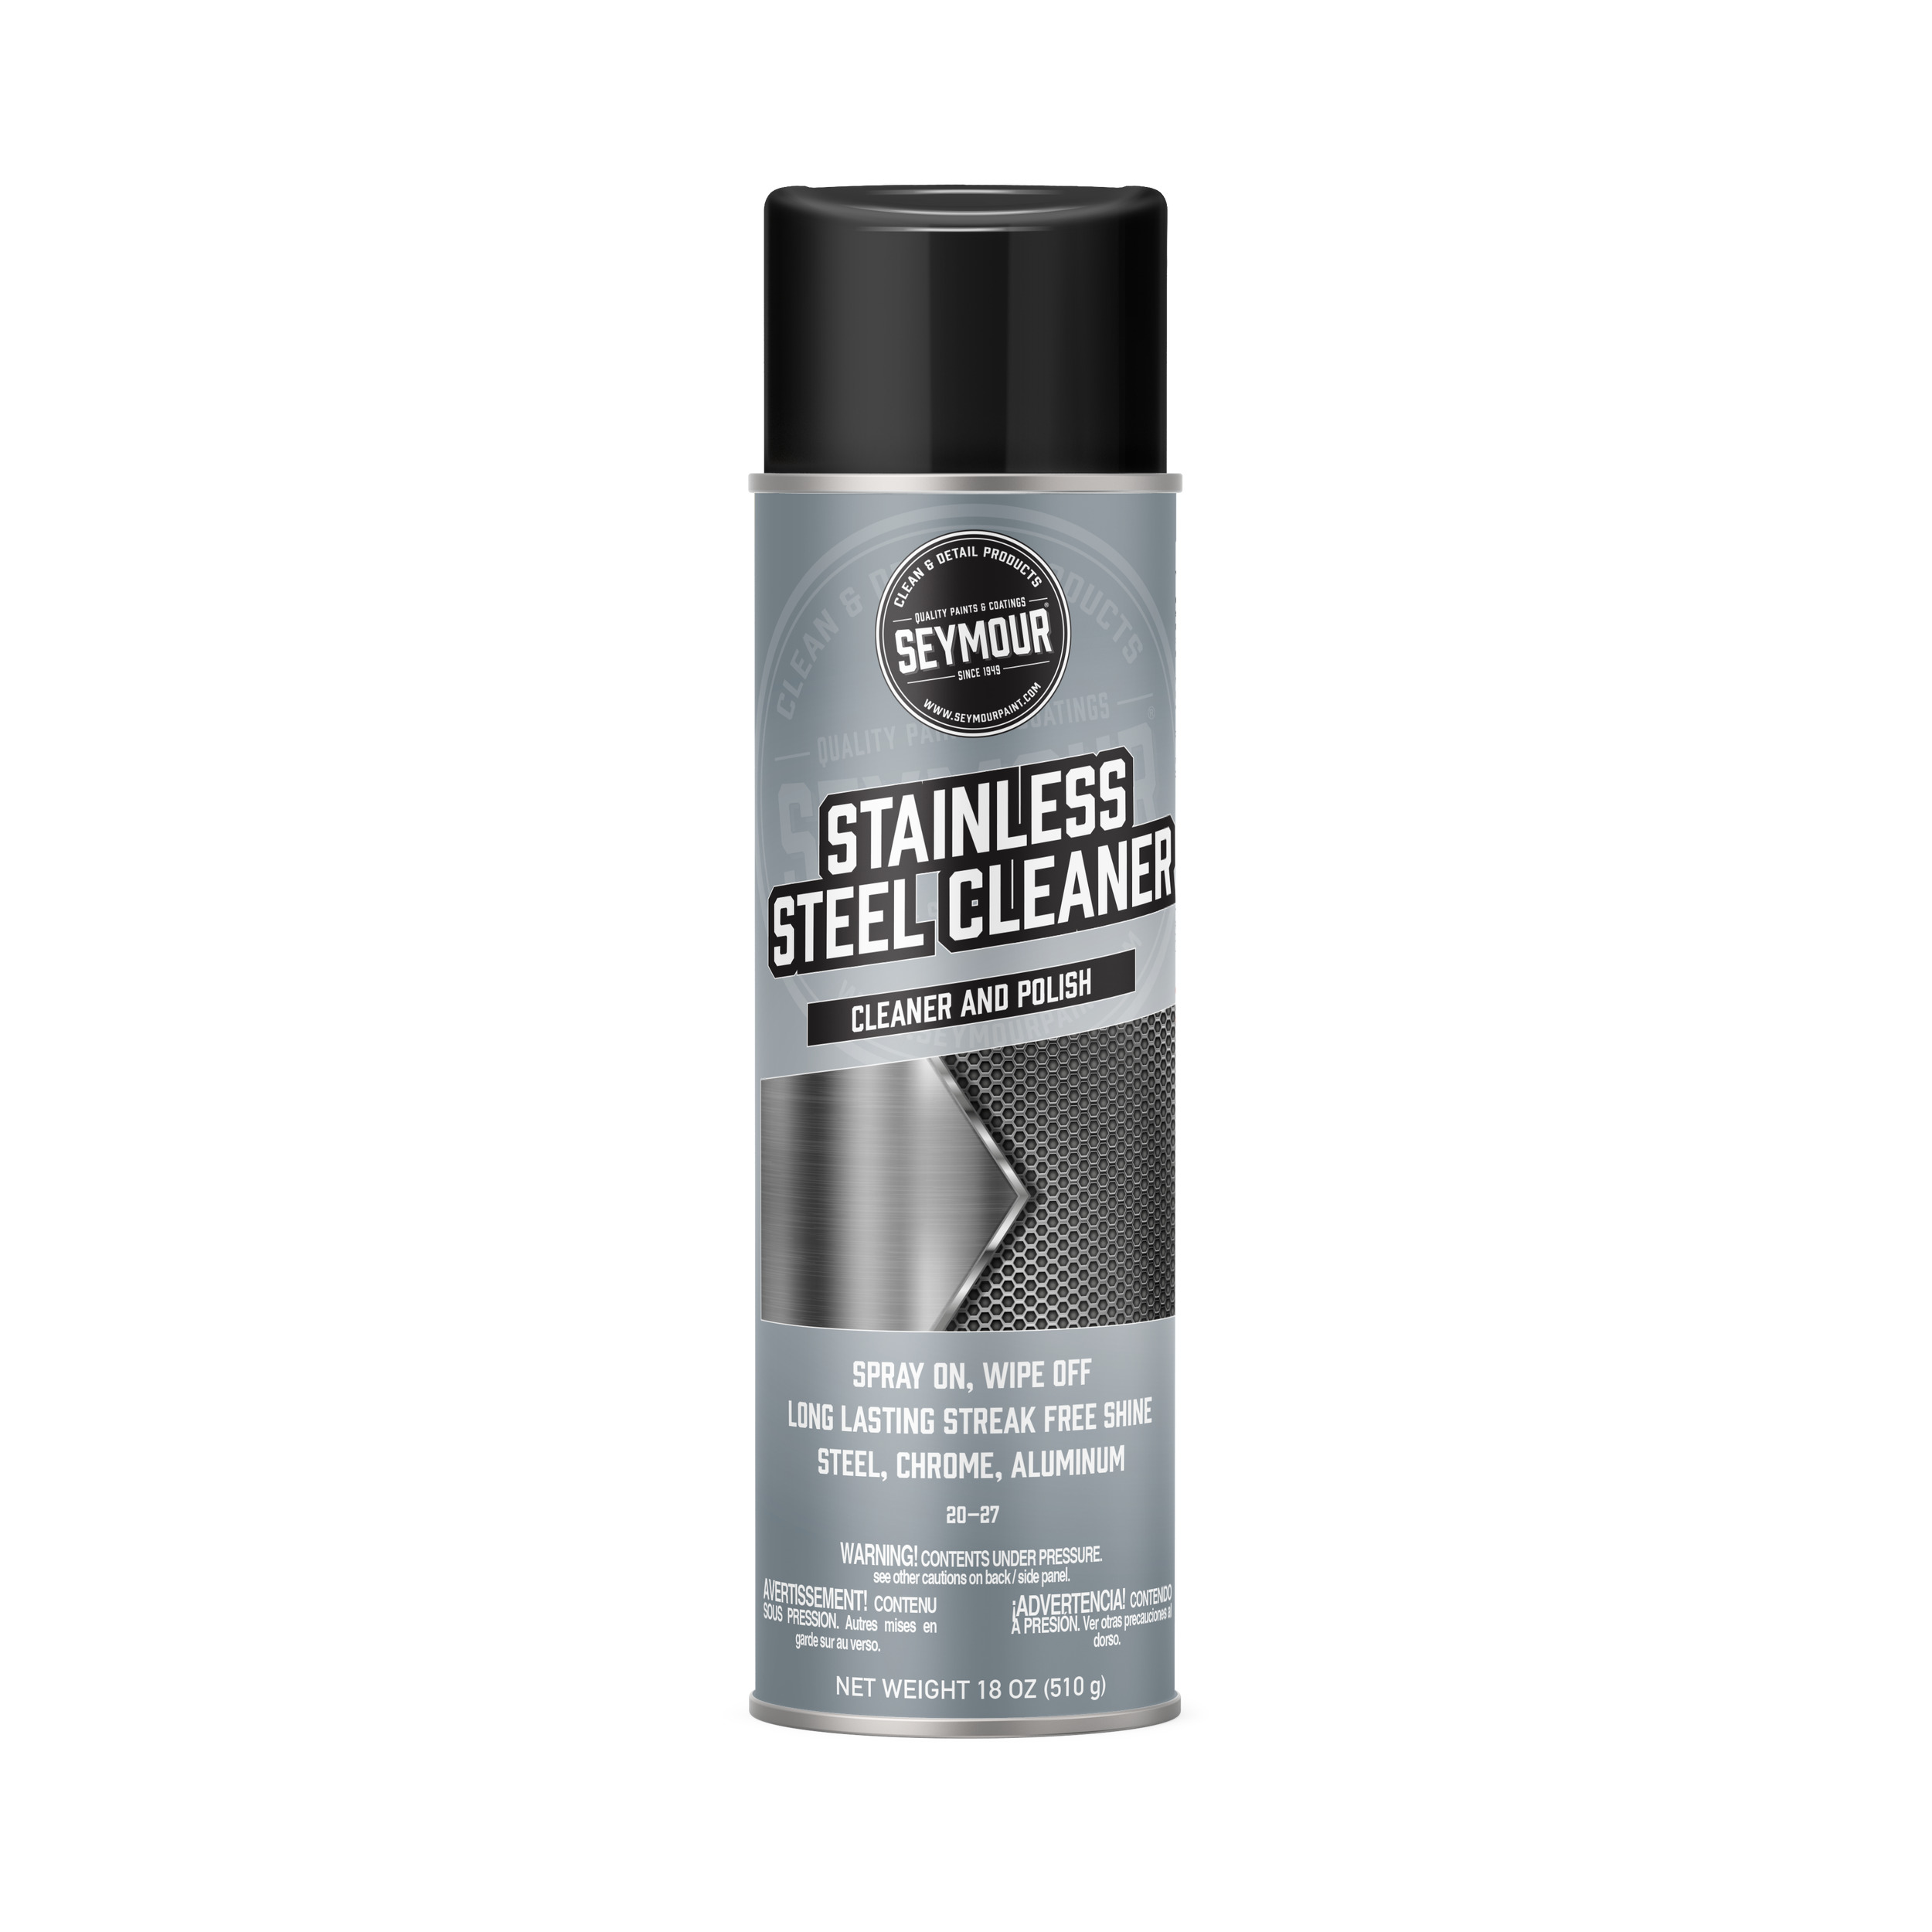 20-27 Seymour Stainless-Steel Cleaner and Polish Spray (18 oz)